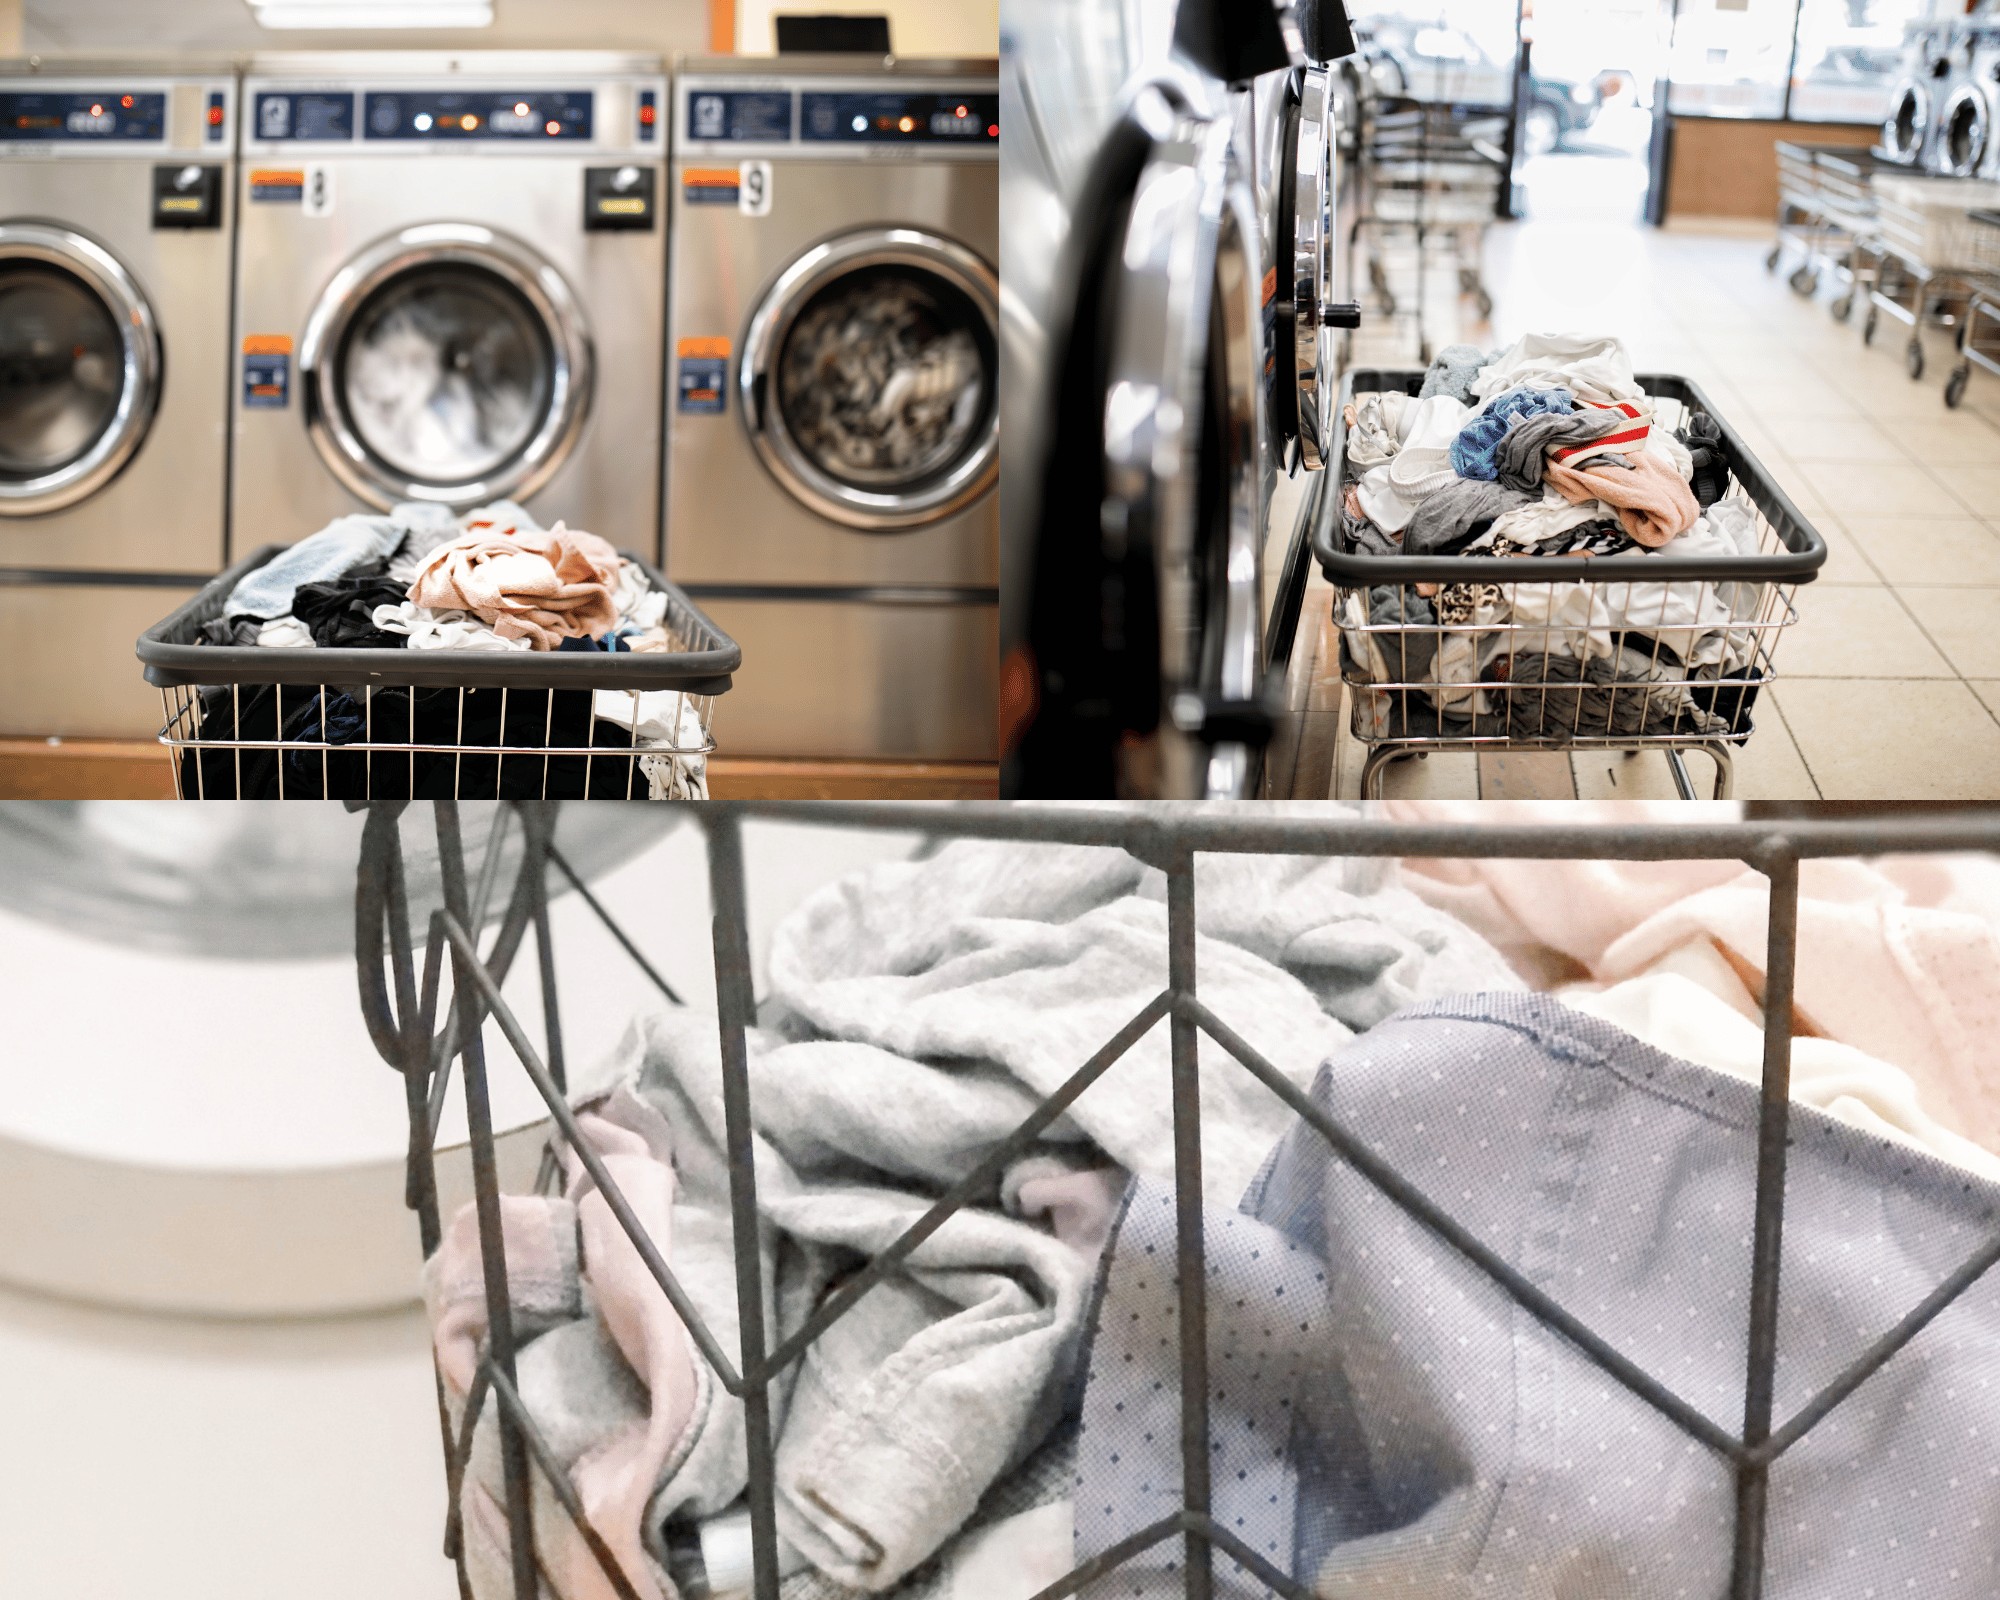 Metal Laundry Baskets That Will Revolutionize Your Laundry Routine